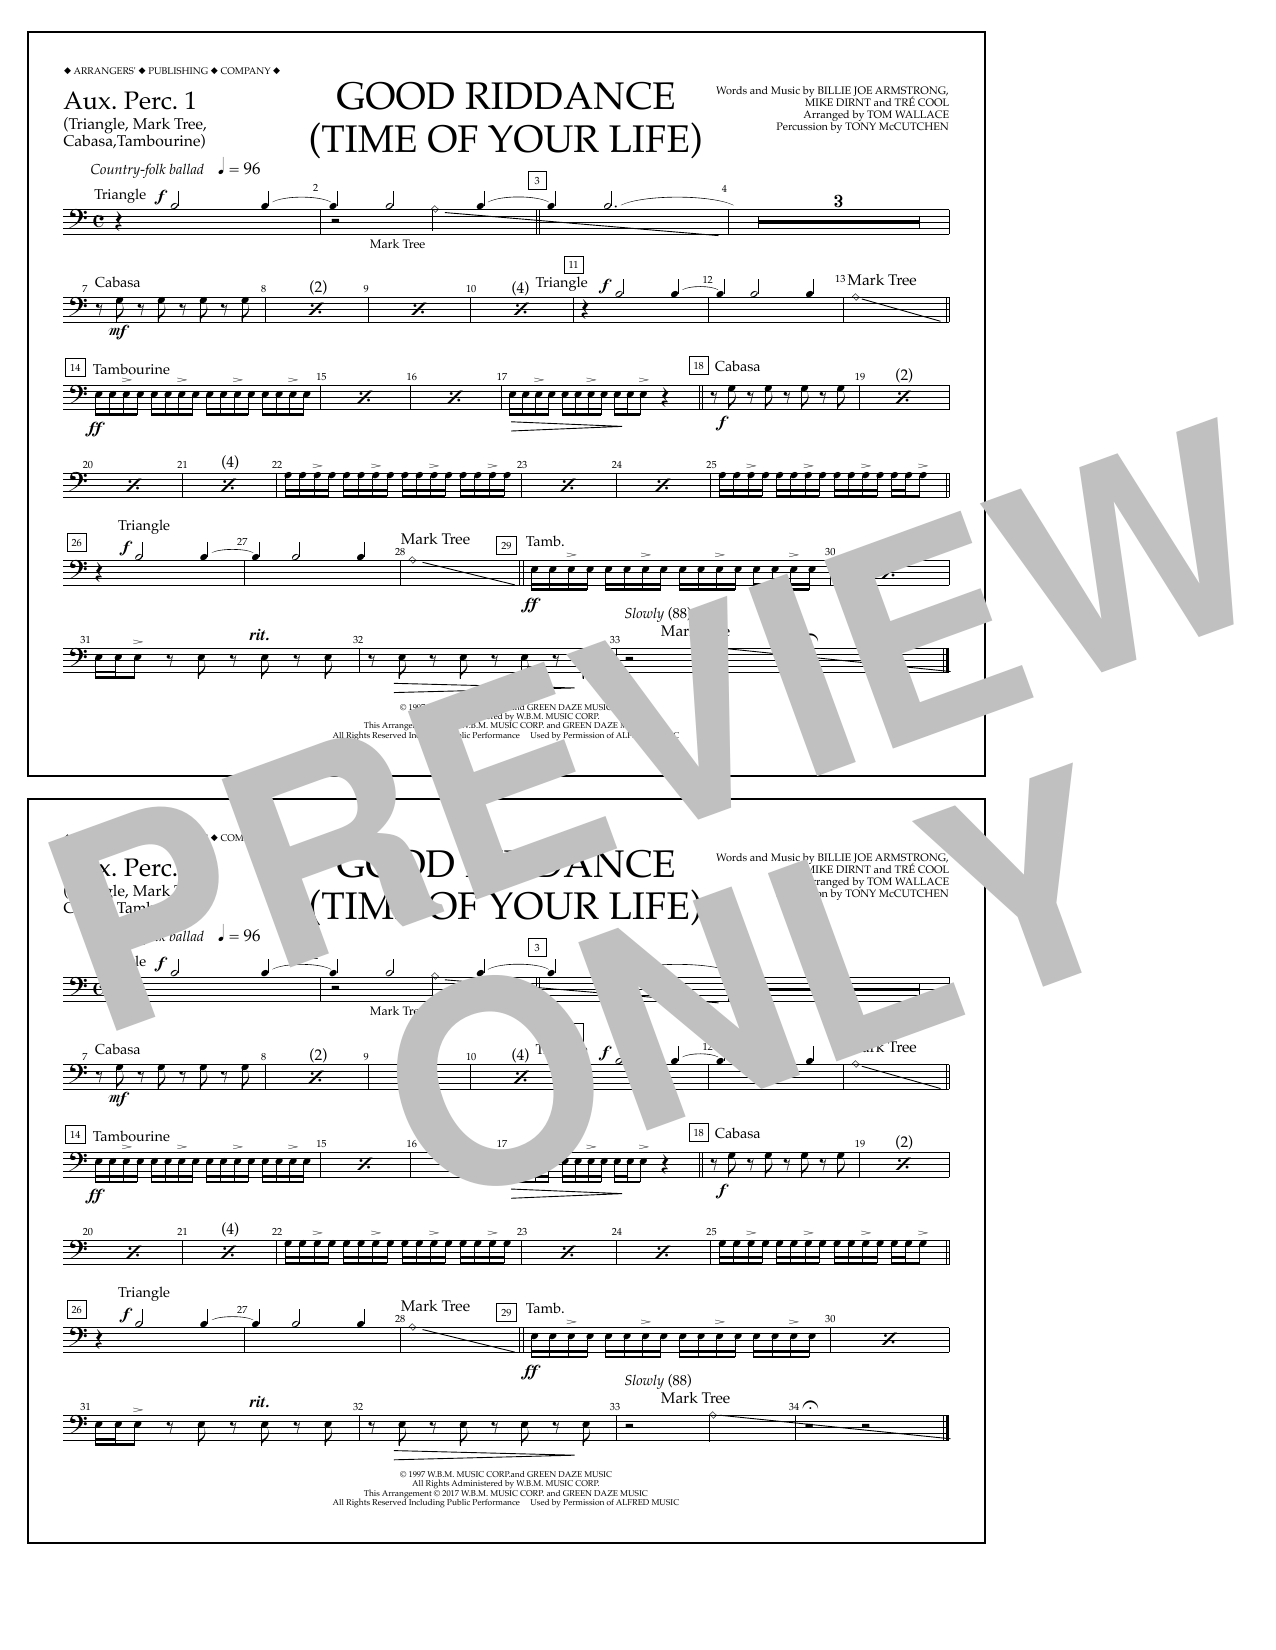 Download Tom Wallace Good Riddance (Time of Your Life) - Aux Sheet Music